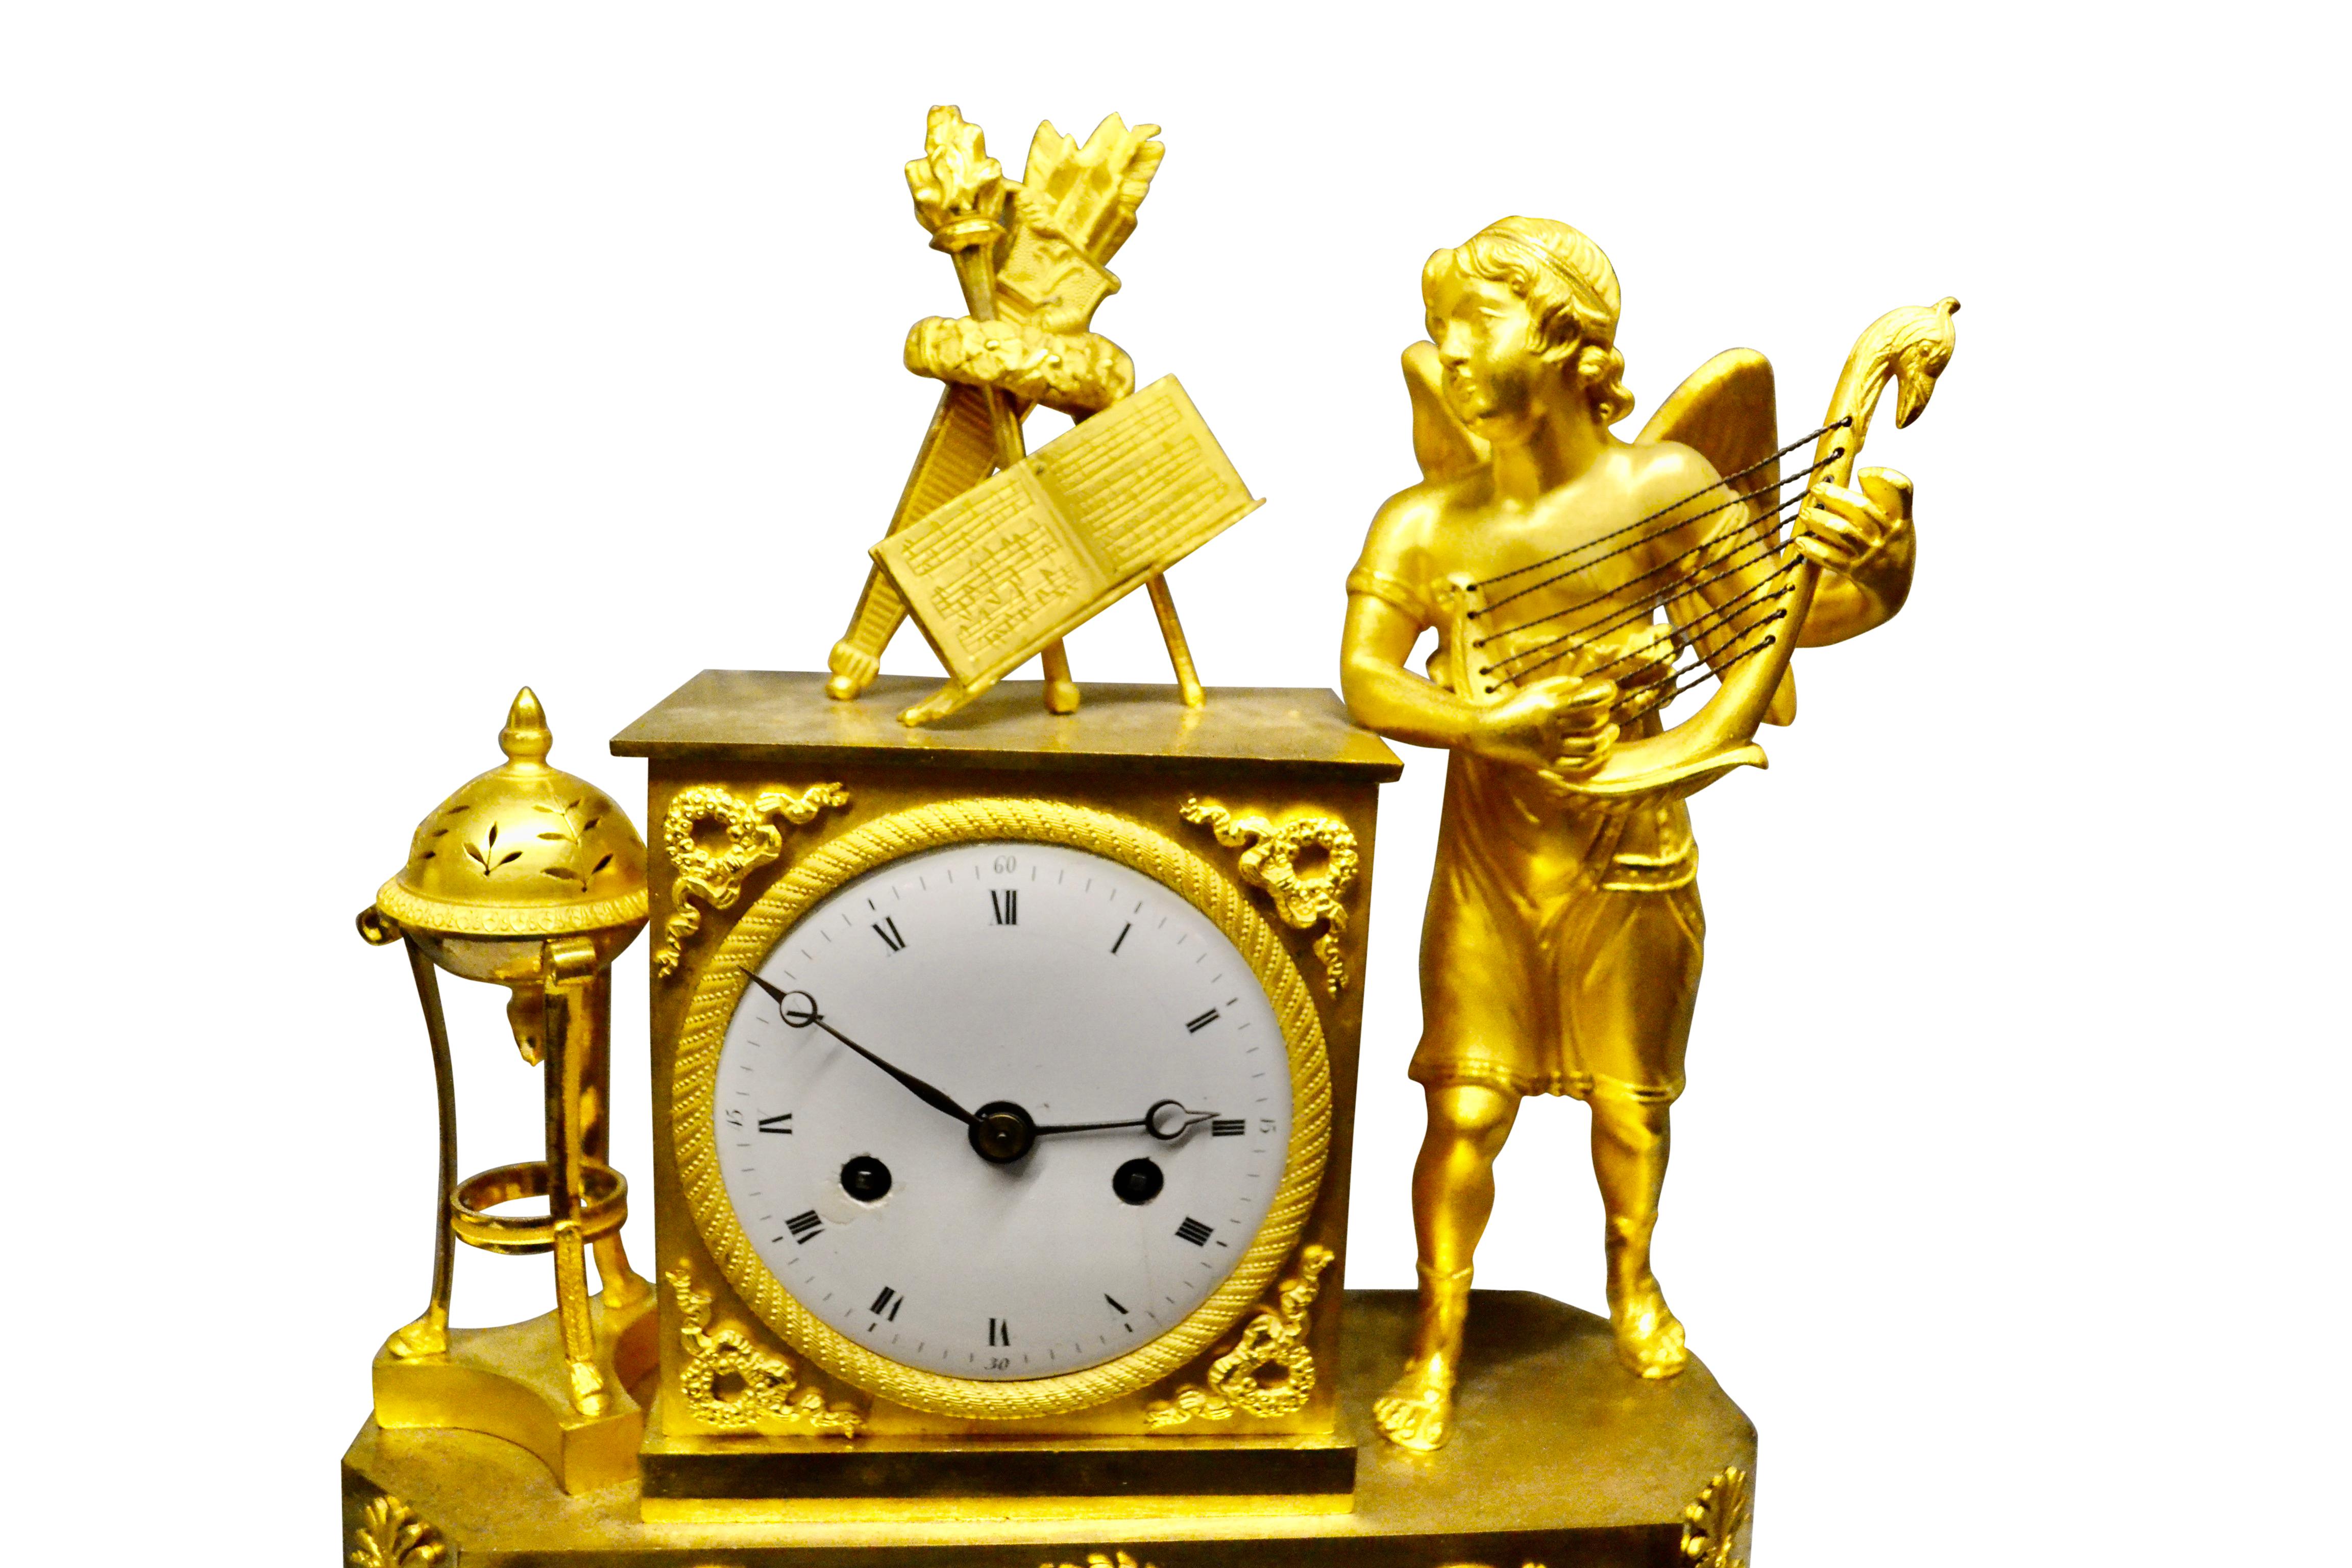 Period French Empire Mantle Clock Depicting a Winged Cupid Playing a Lute In Good Condition For Sale In Vancouver, British Columbia